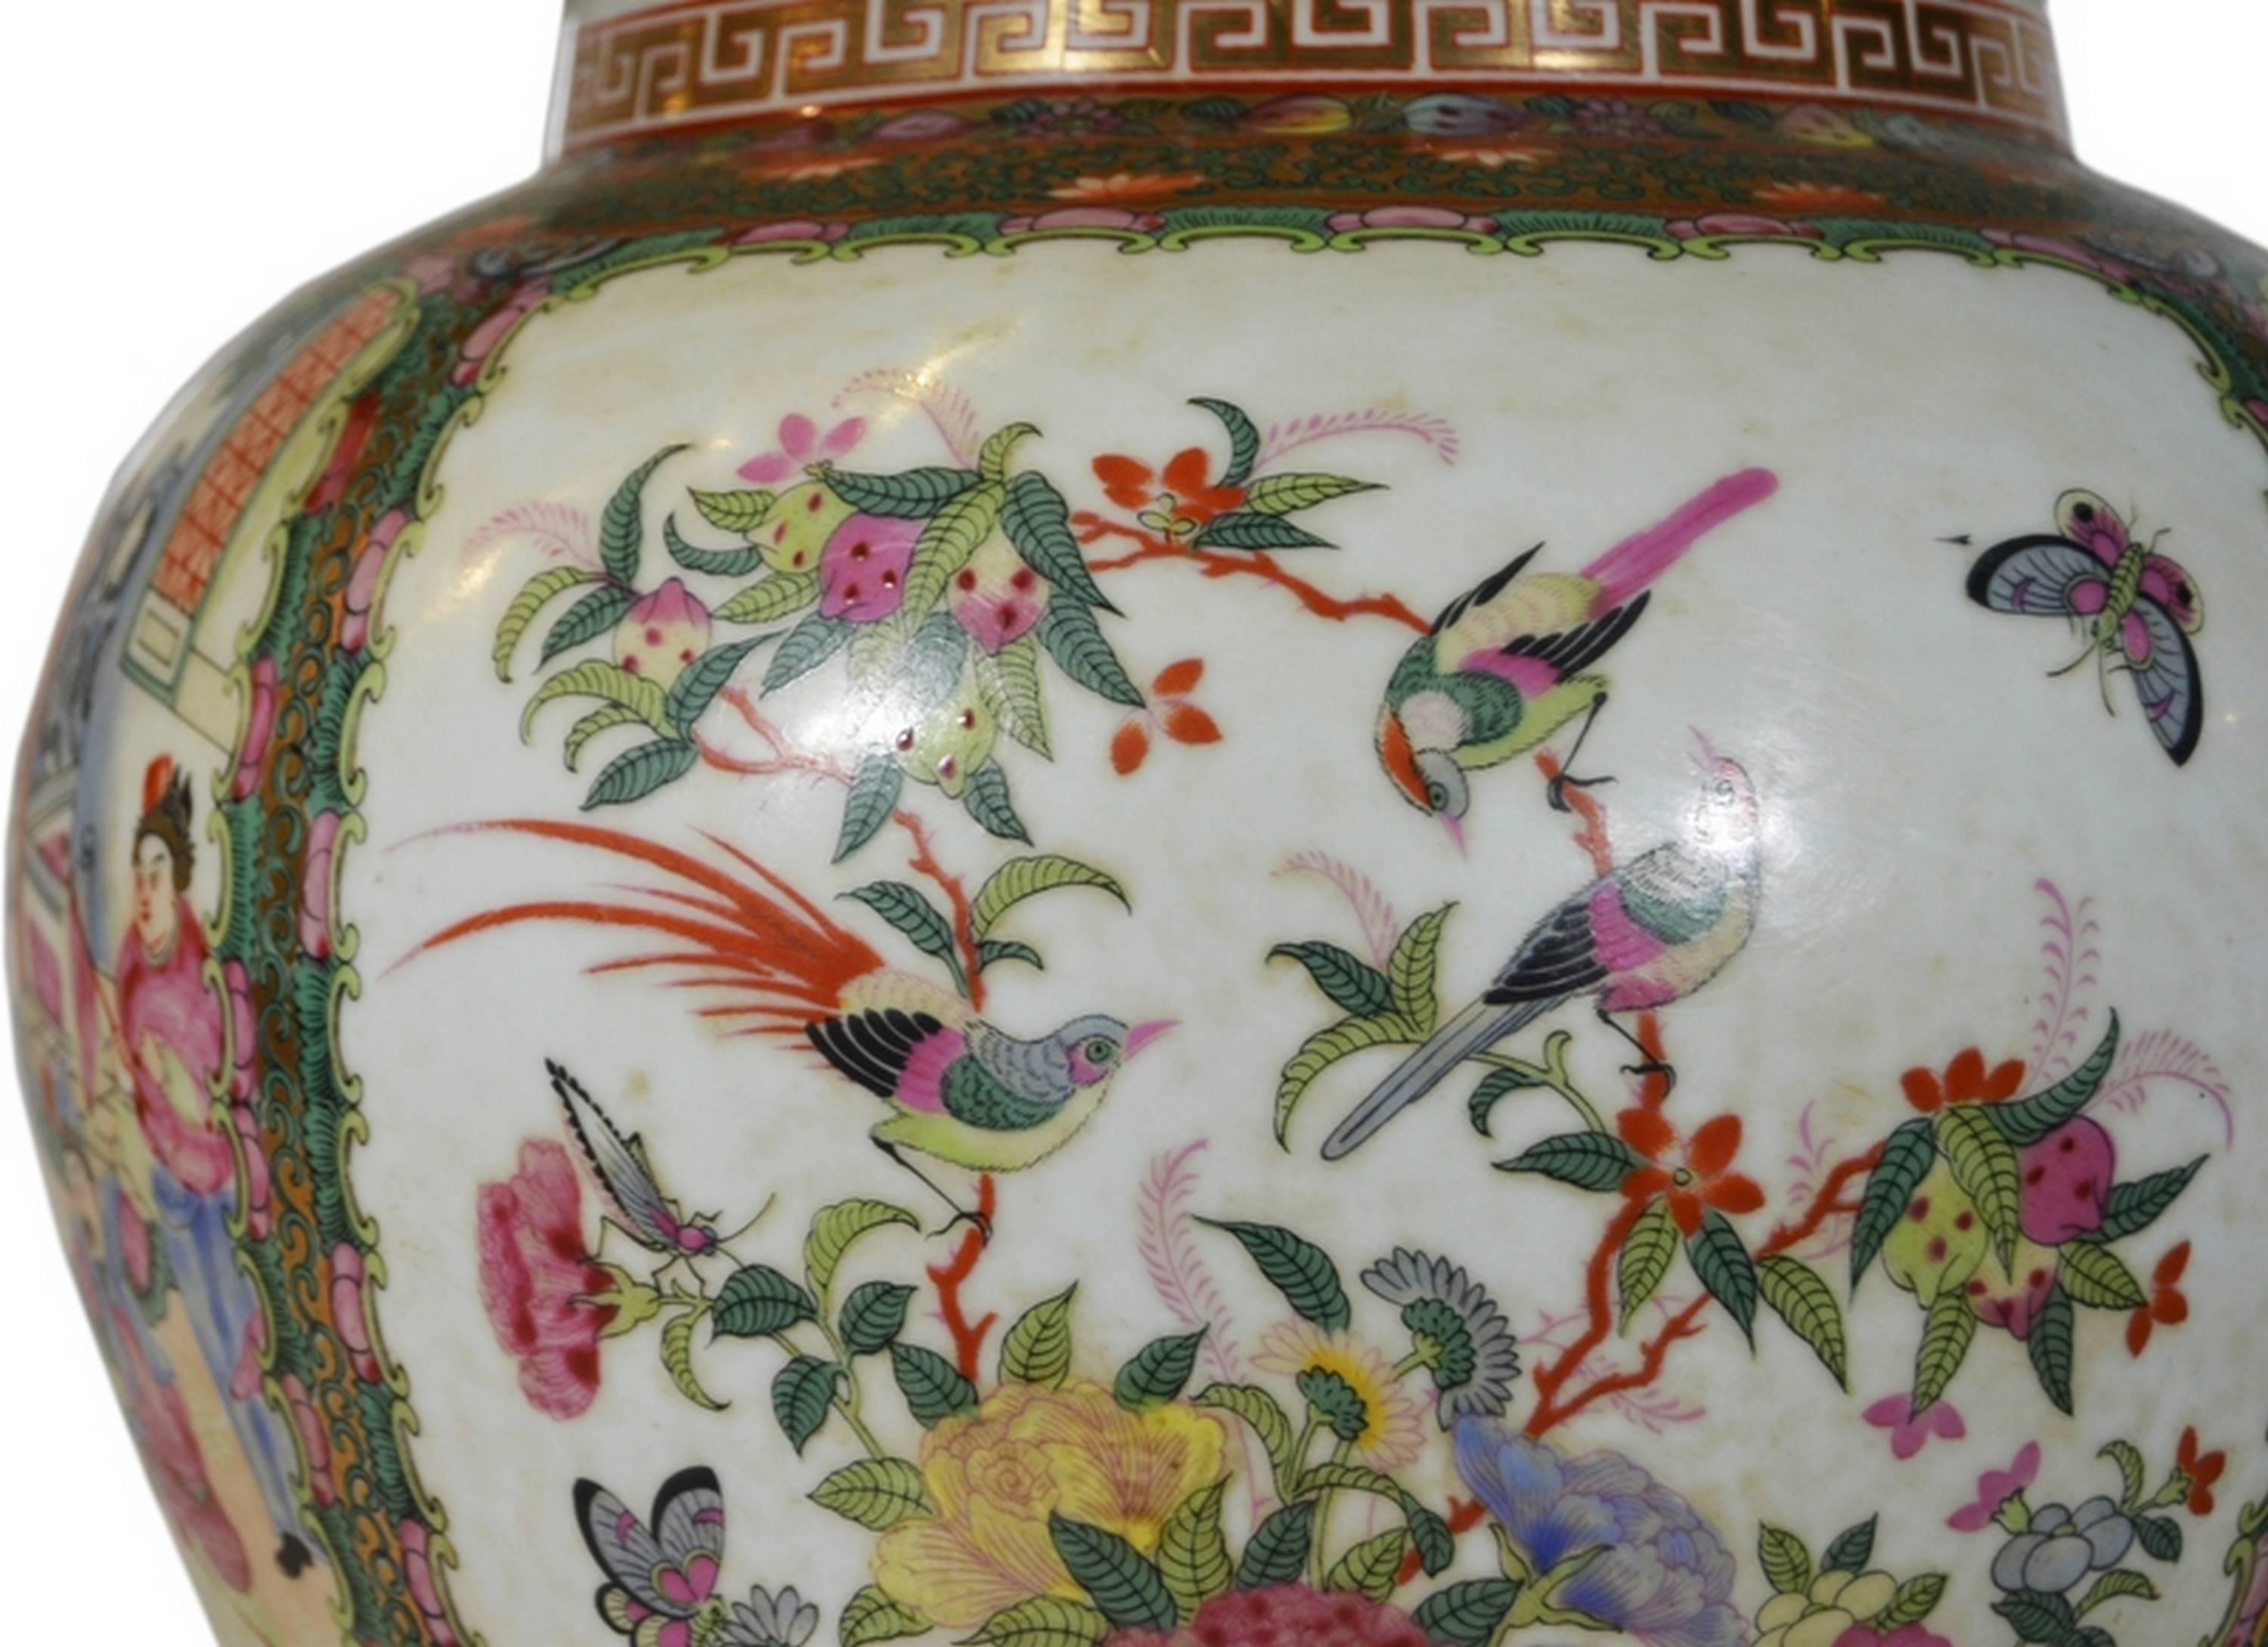 Vintage Porcelain Lamp with Hand-Painted Flowers and Birds from 1970s, China 1